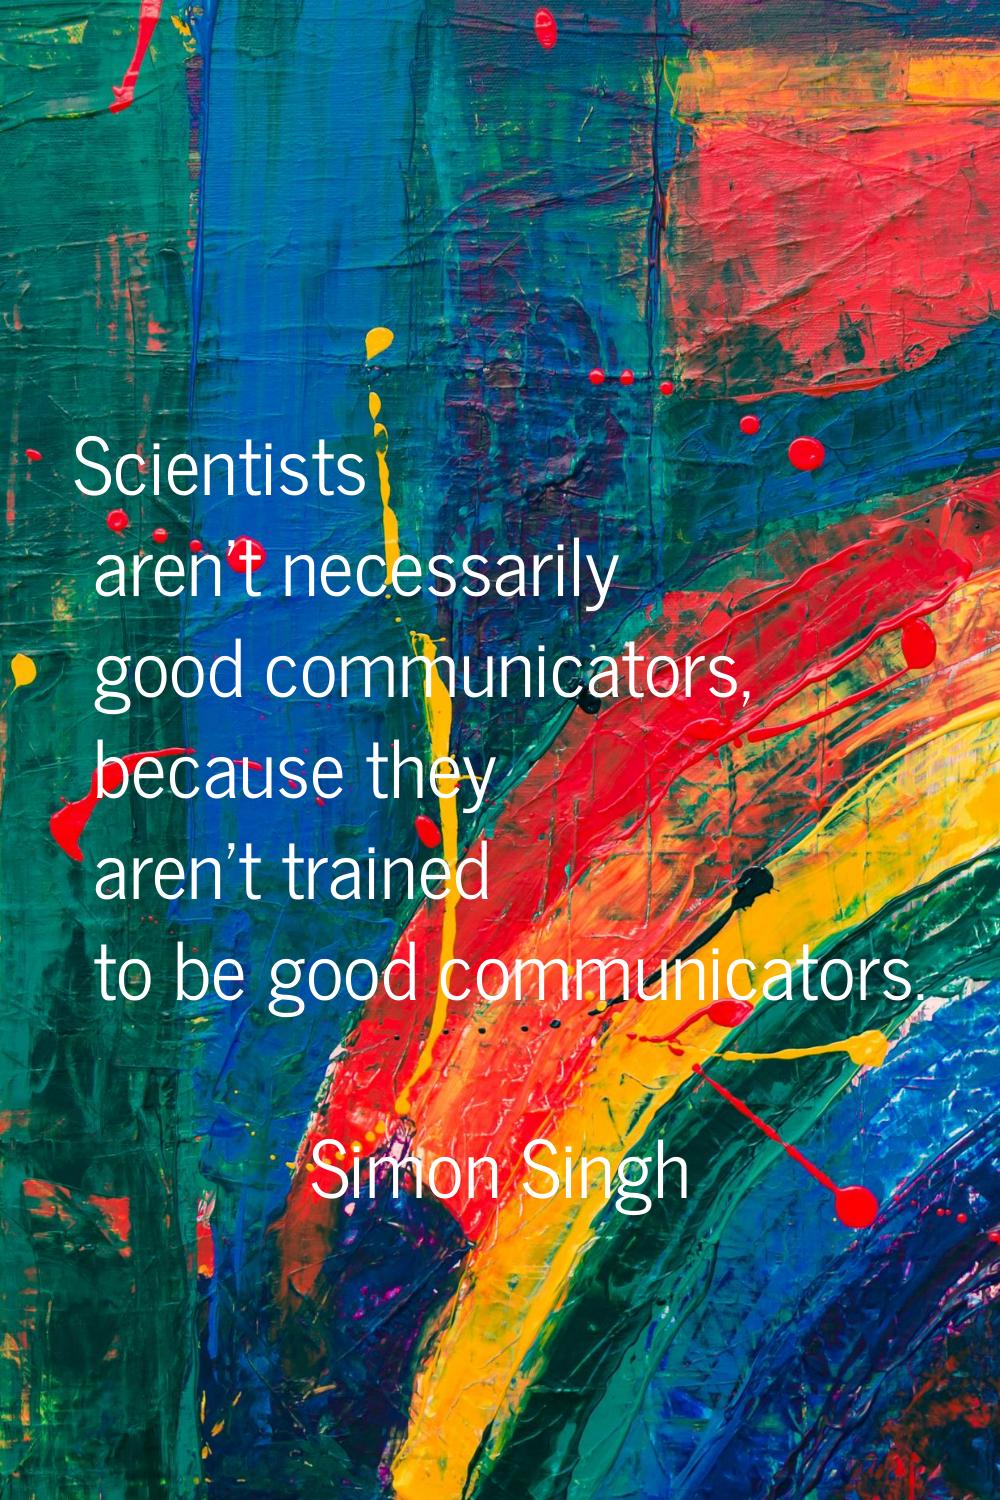 Scientists aren't necessarily good communicators, because they aren't trained to be good communicat